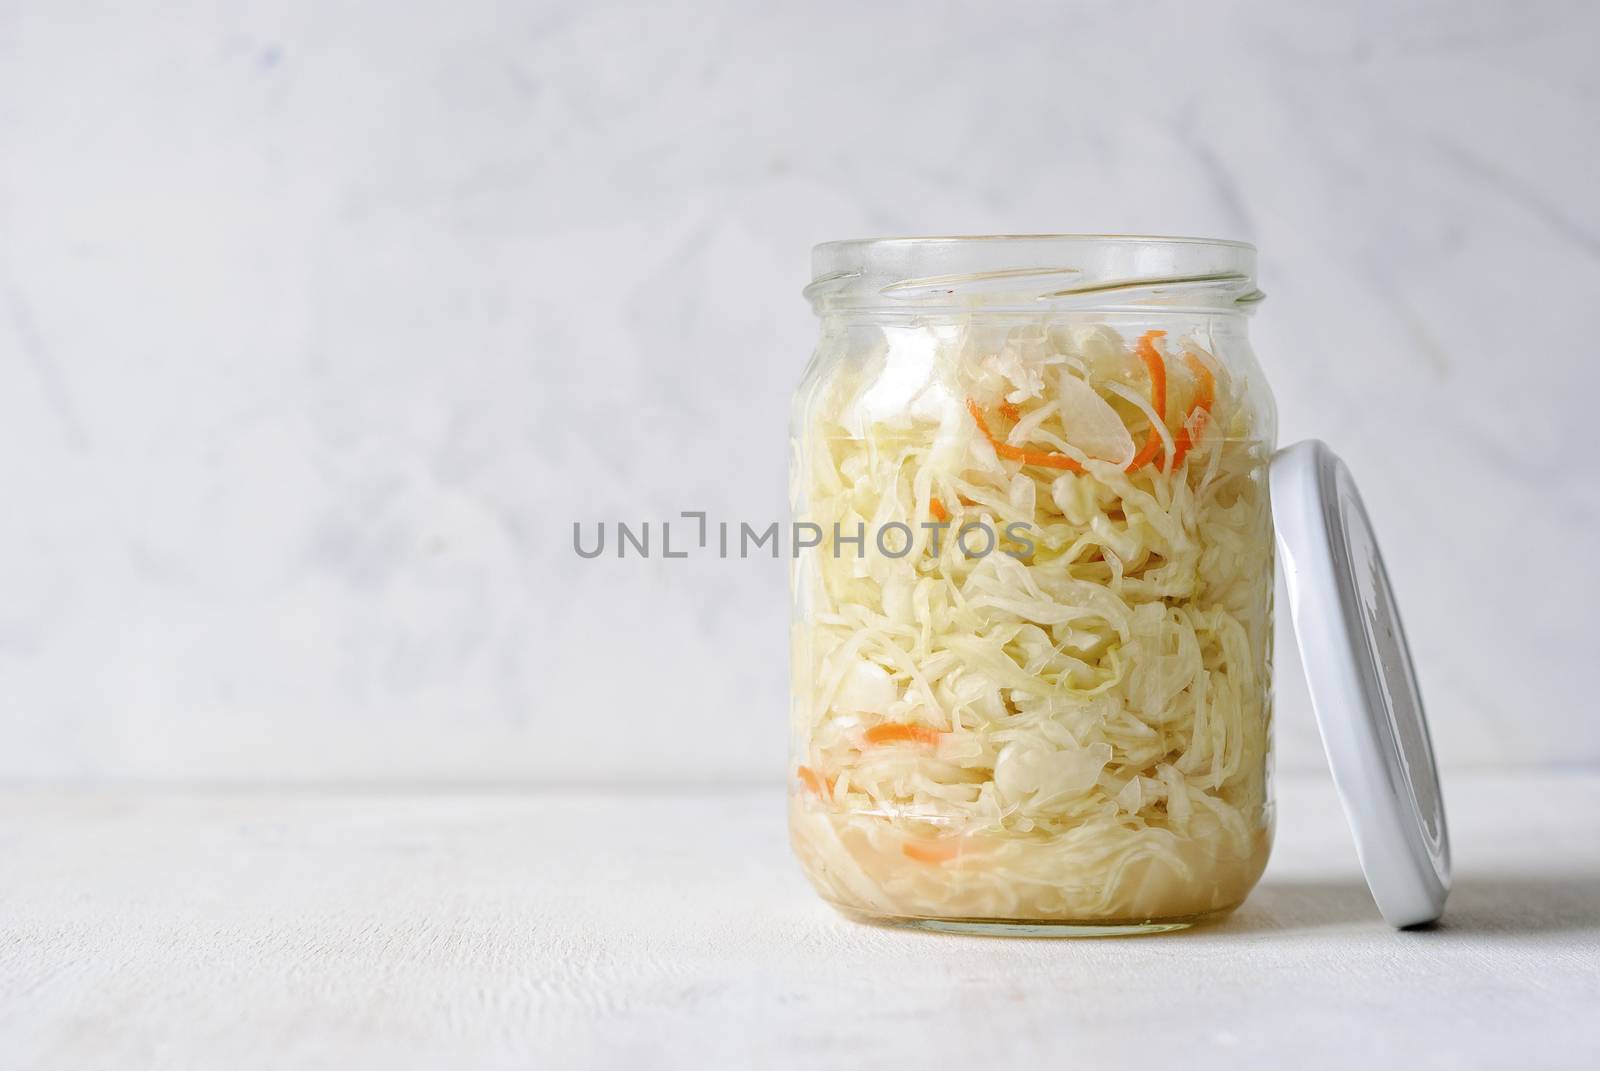 Transparent jar filled with juicy sauerkraut composed on white background